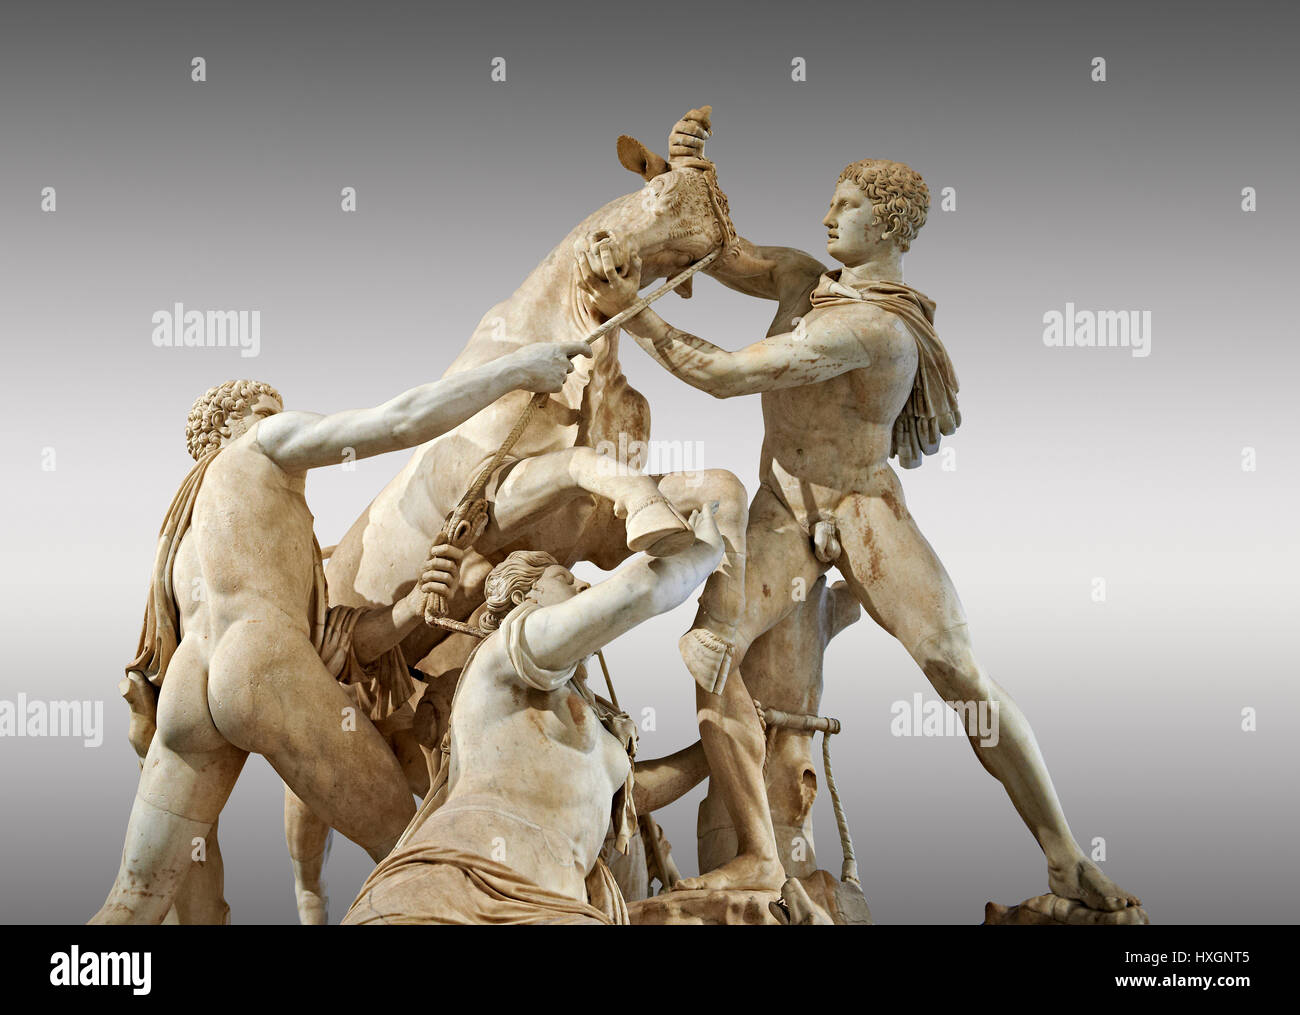 2nd century AD Roman sculpture known as the Farnese Bull Baths of Caracalla, Rome, Naples National Museum of Archaeology, Italy, Stock Photo